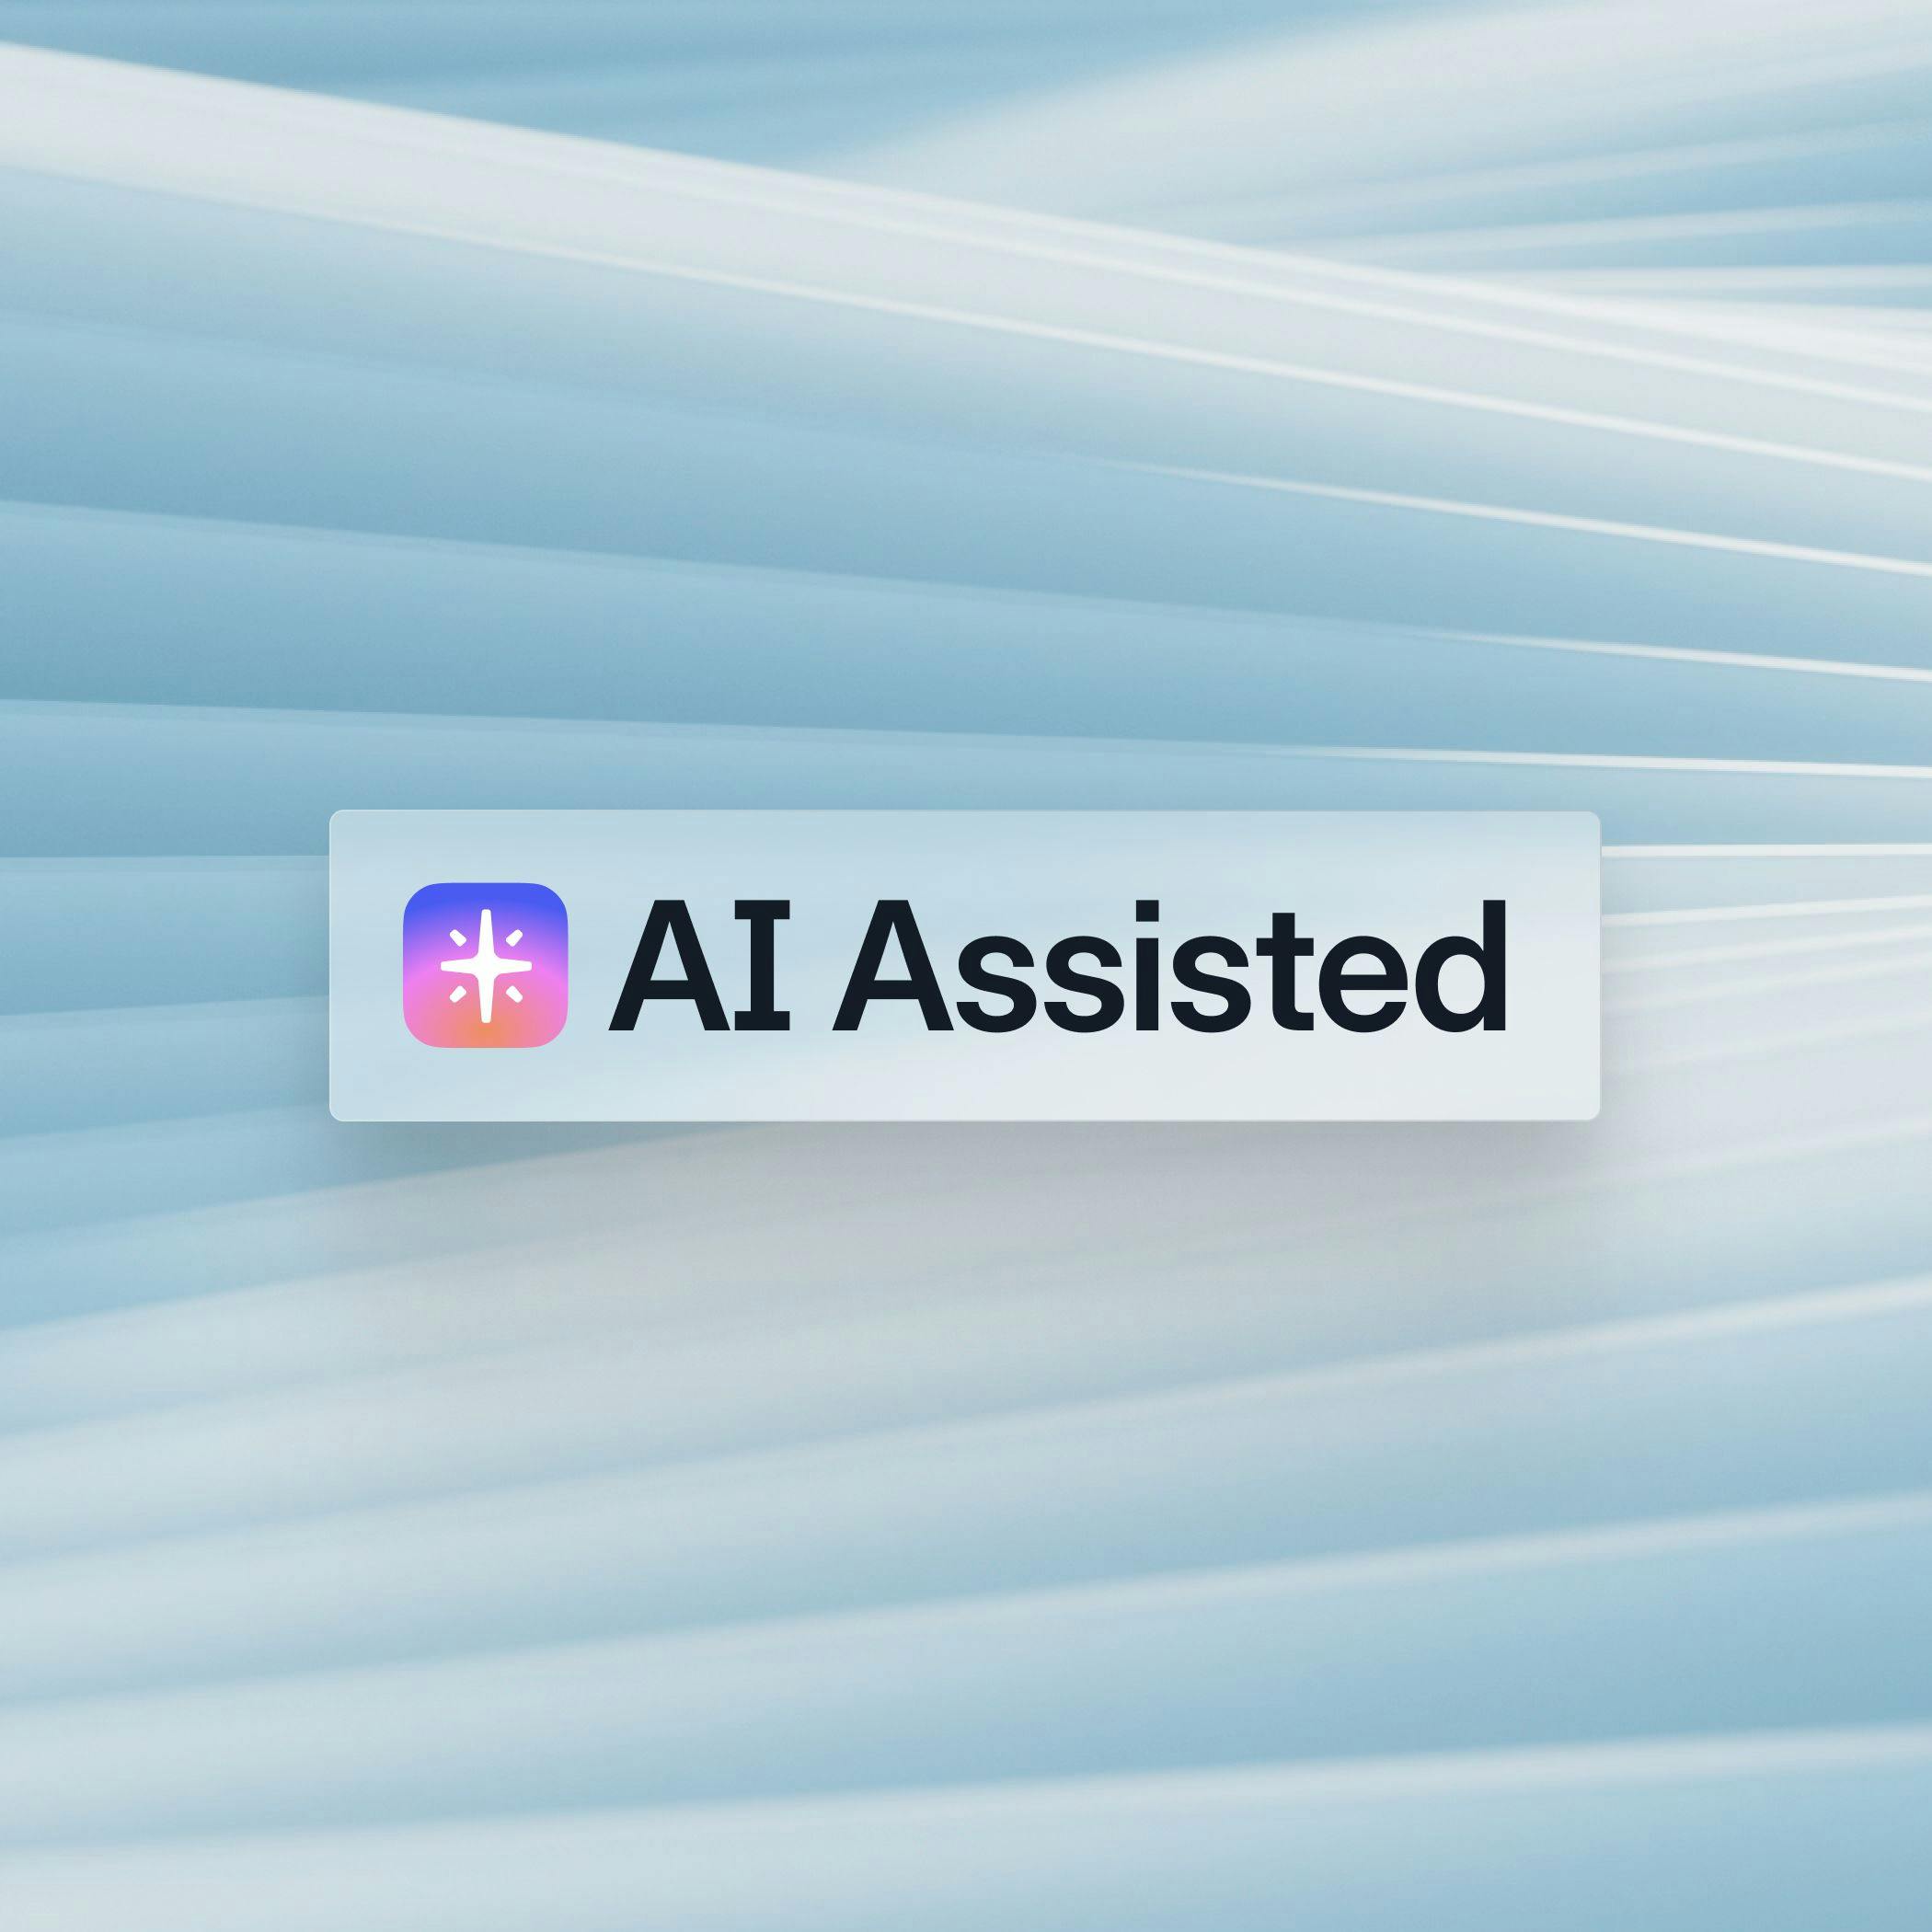 Image with "AI Assisted" ontop of a blue textured background.